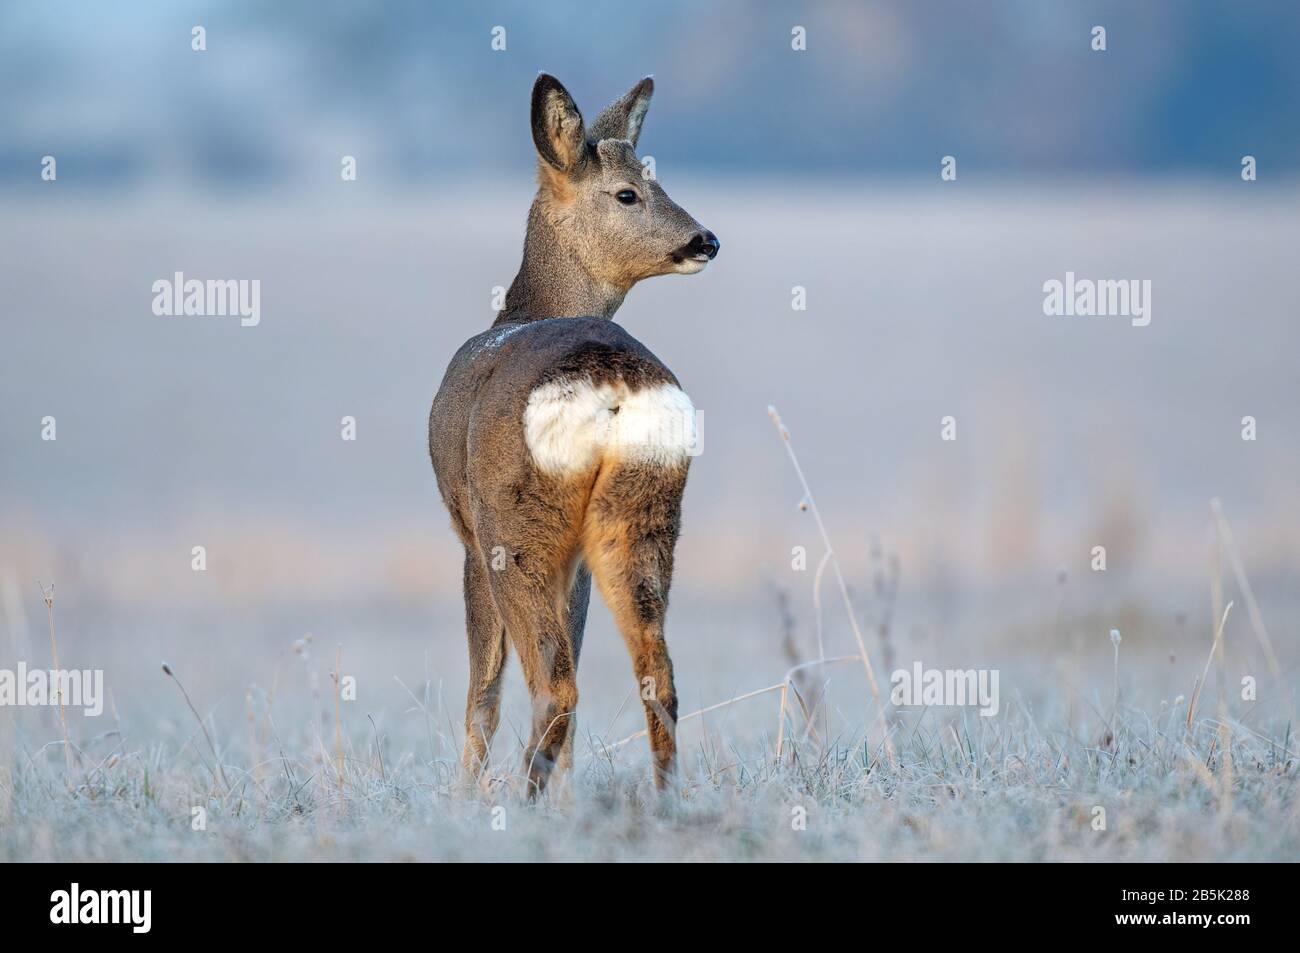 Wild female roe deer, standing in a frost covered field during winter season Stock Photo